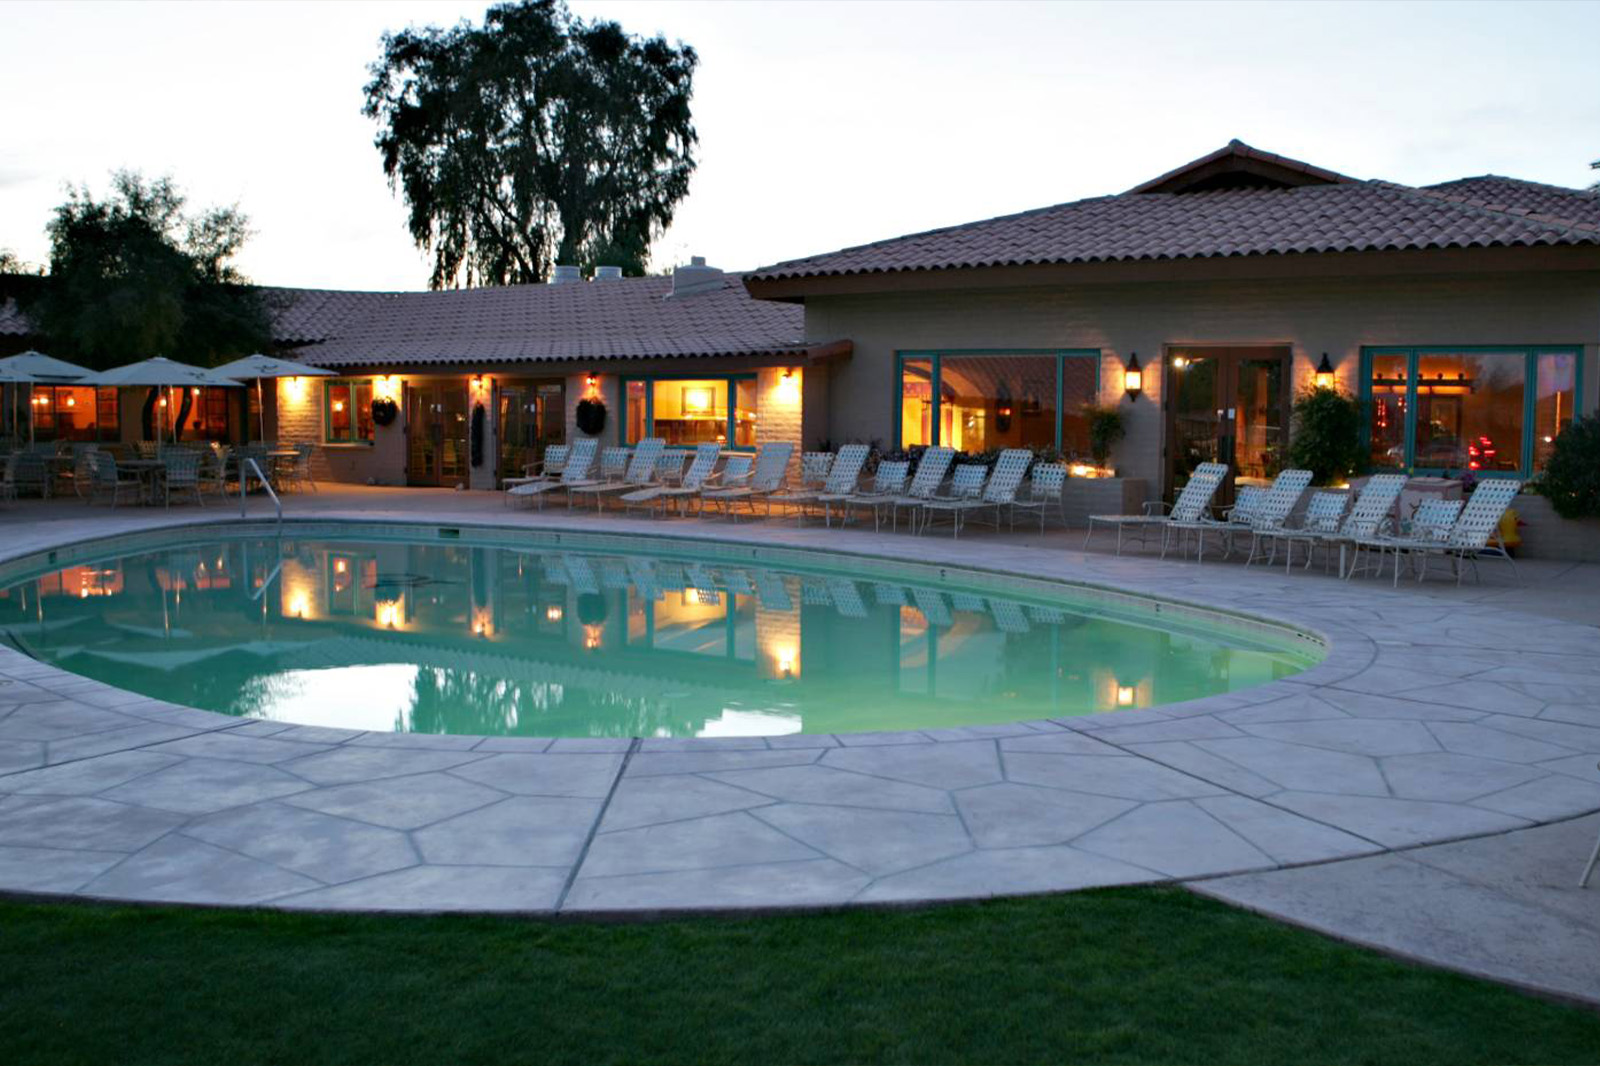 Outdoor pool with lounge area